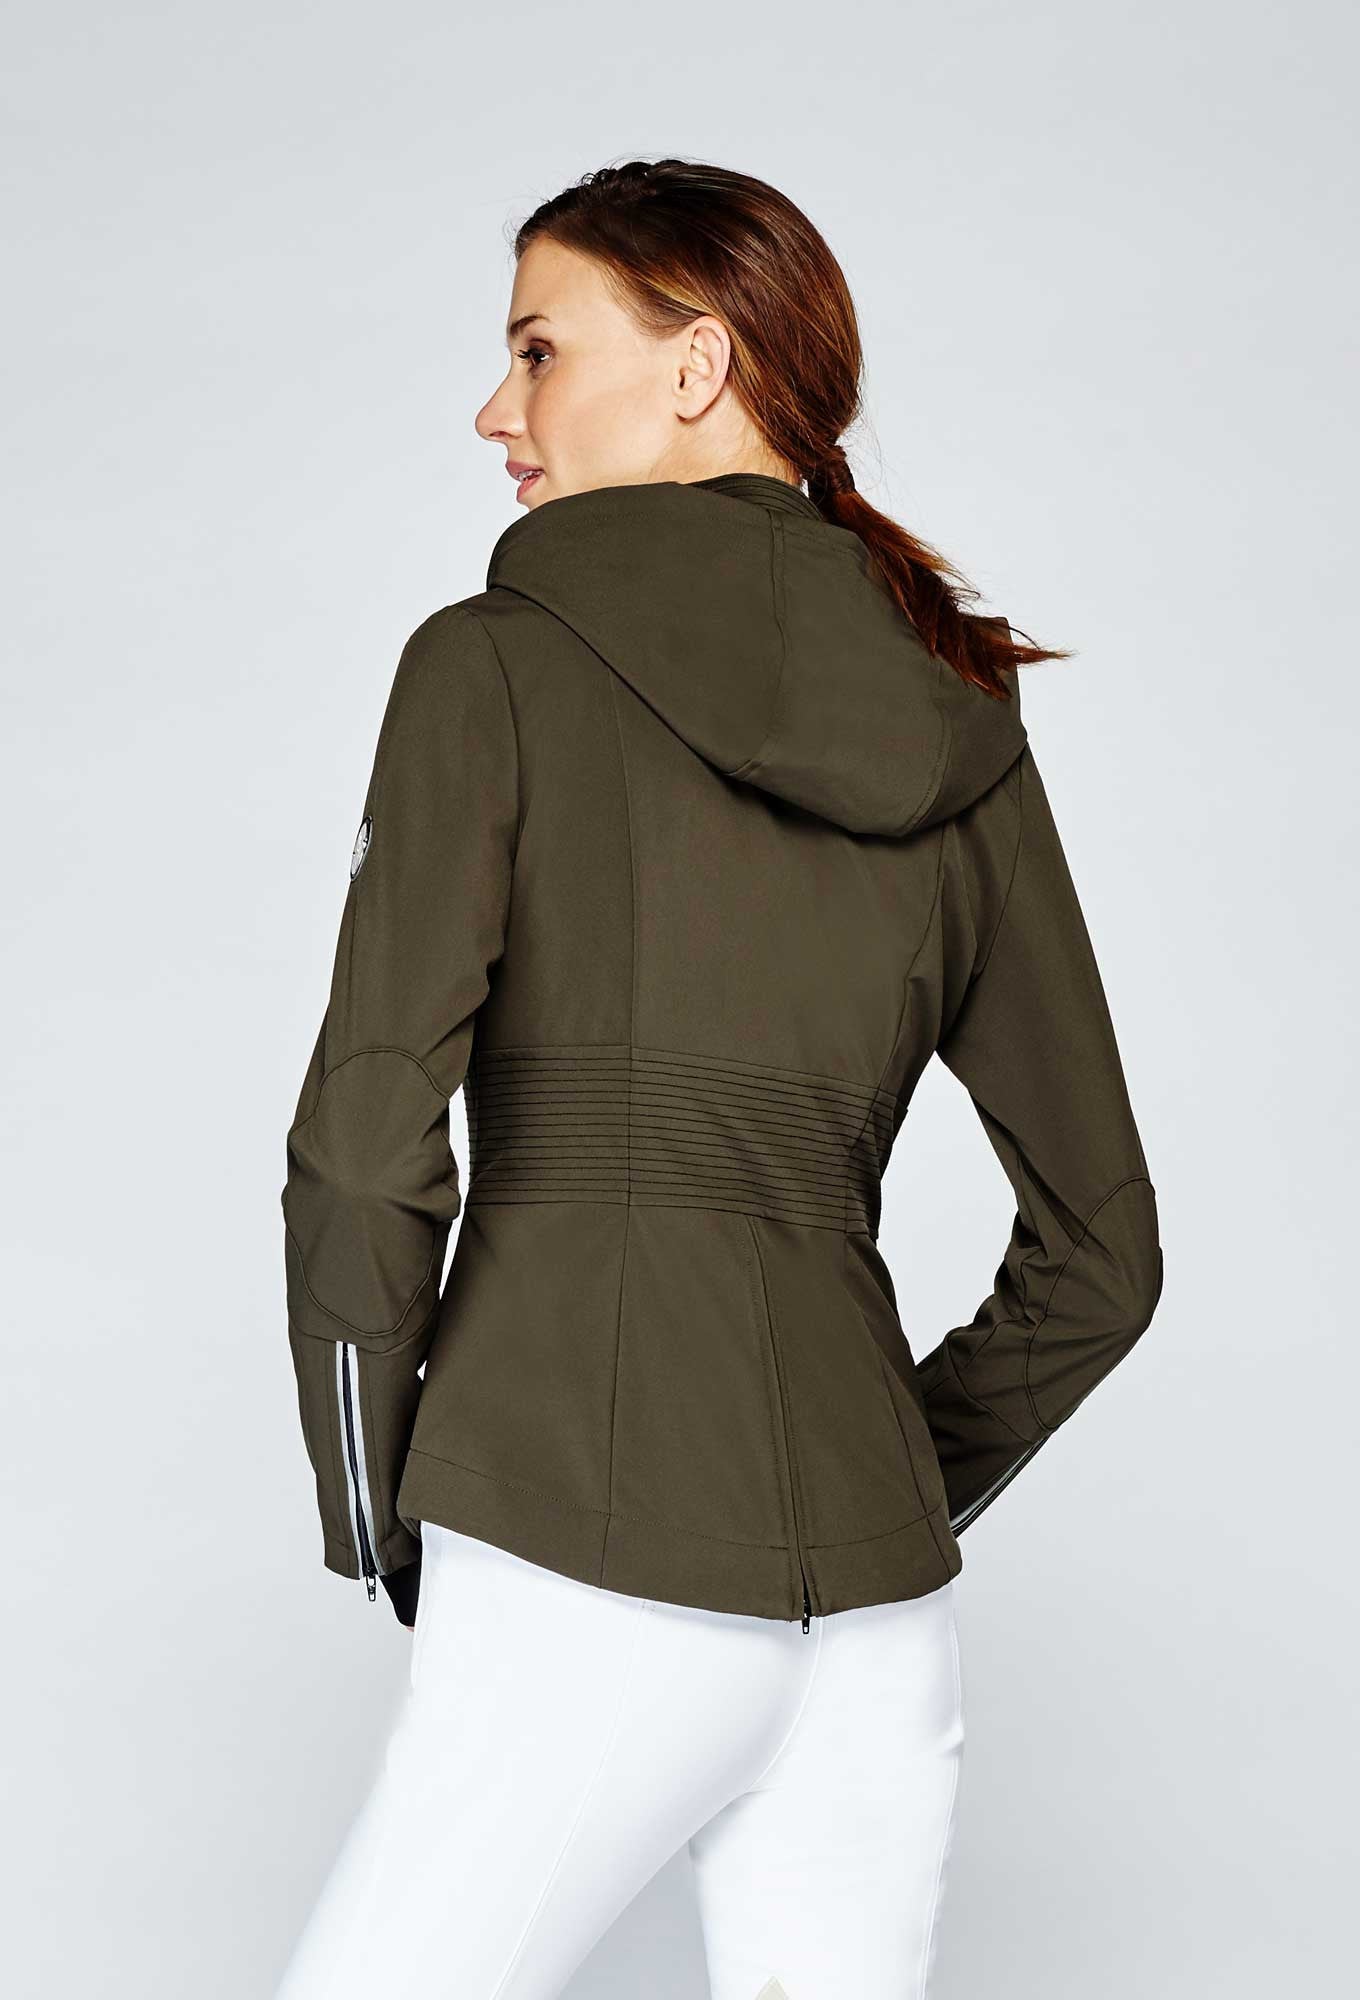 Noel Asmar Special Edition Rider Jacket - Olive - Uptown E Store